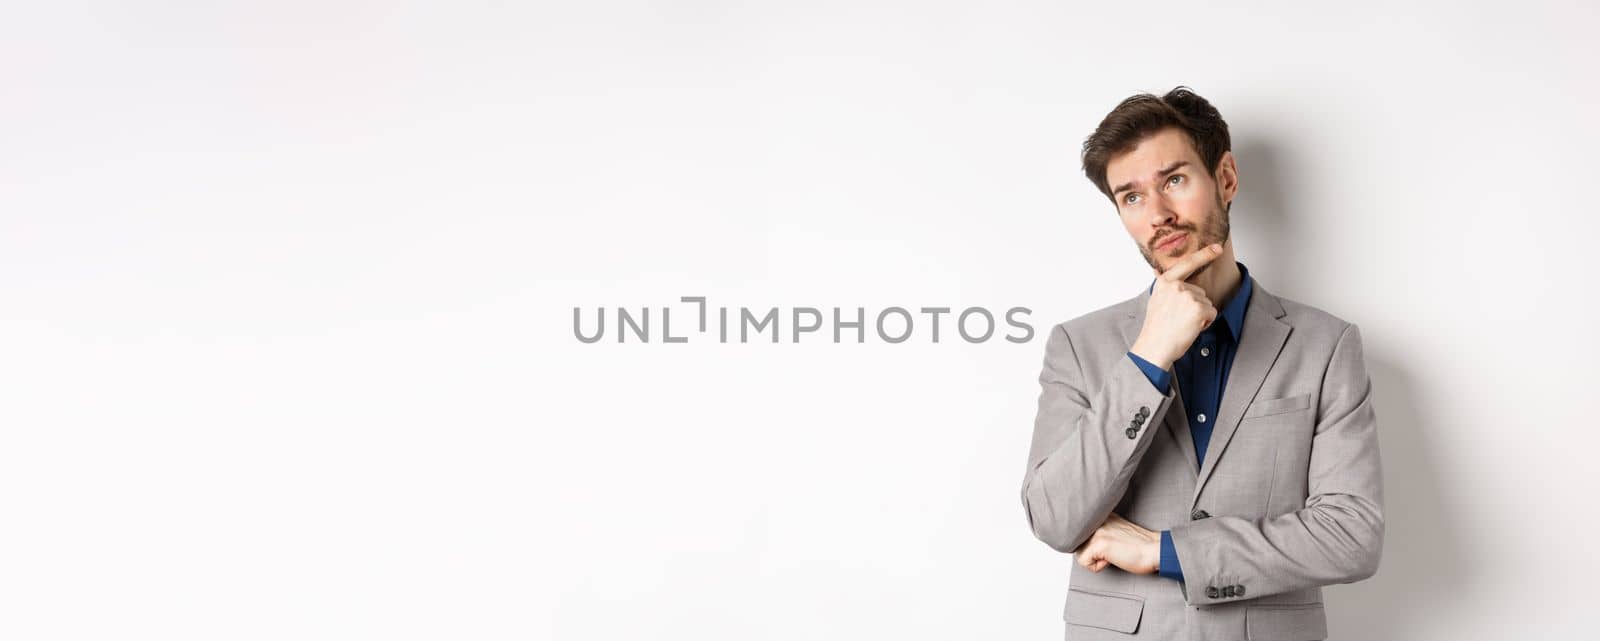 Thoughtful businessman in grey suit look at upper left corner logo, thinking or making choice, pondering plan, standing against white background.